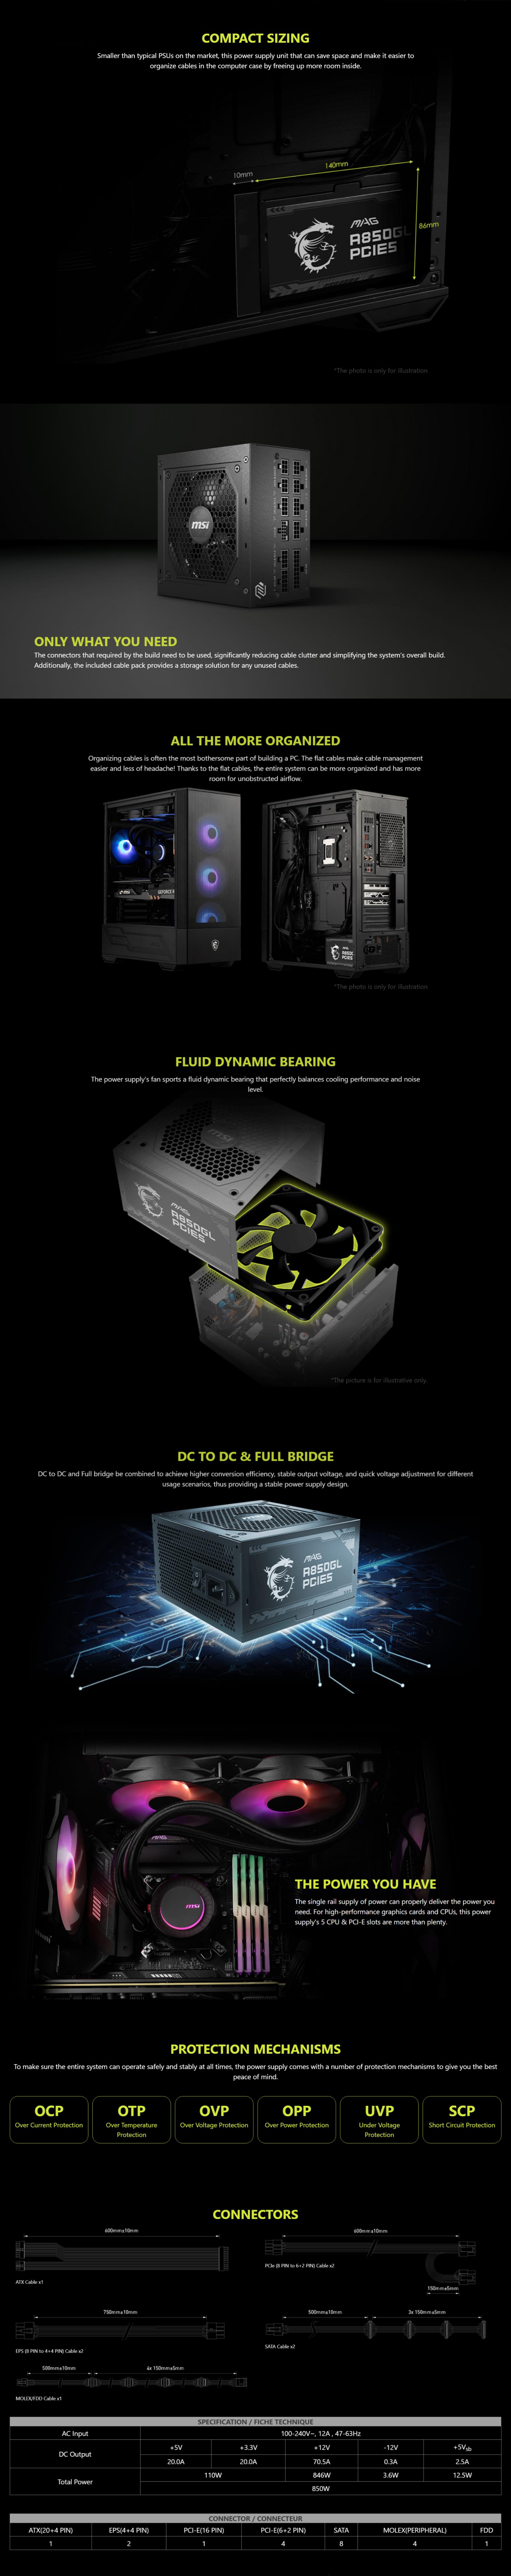 A large marketing image providing additional information about the product MSI MAG A850GL 850W Gold PCIe 5.0 Modular PSU - Additional alt info not provided